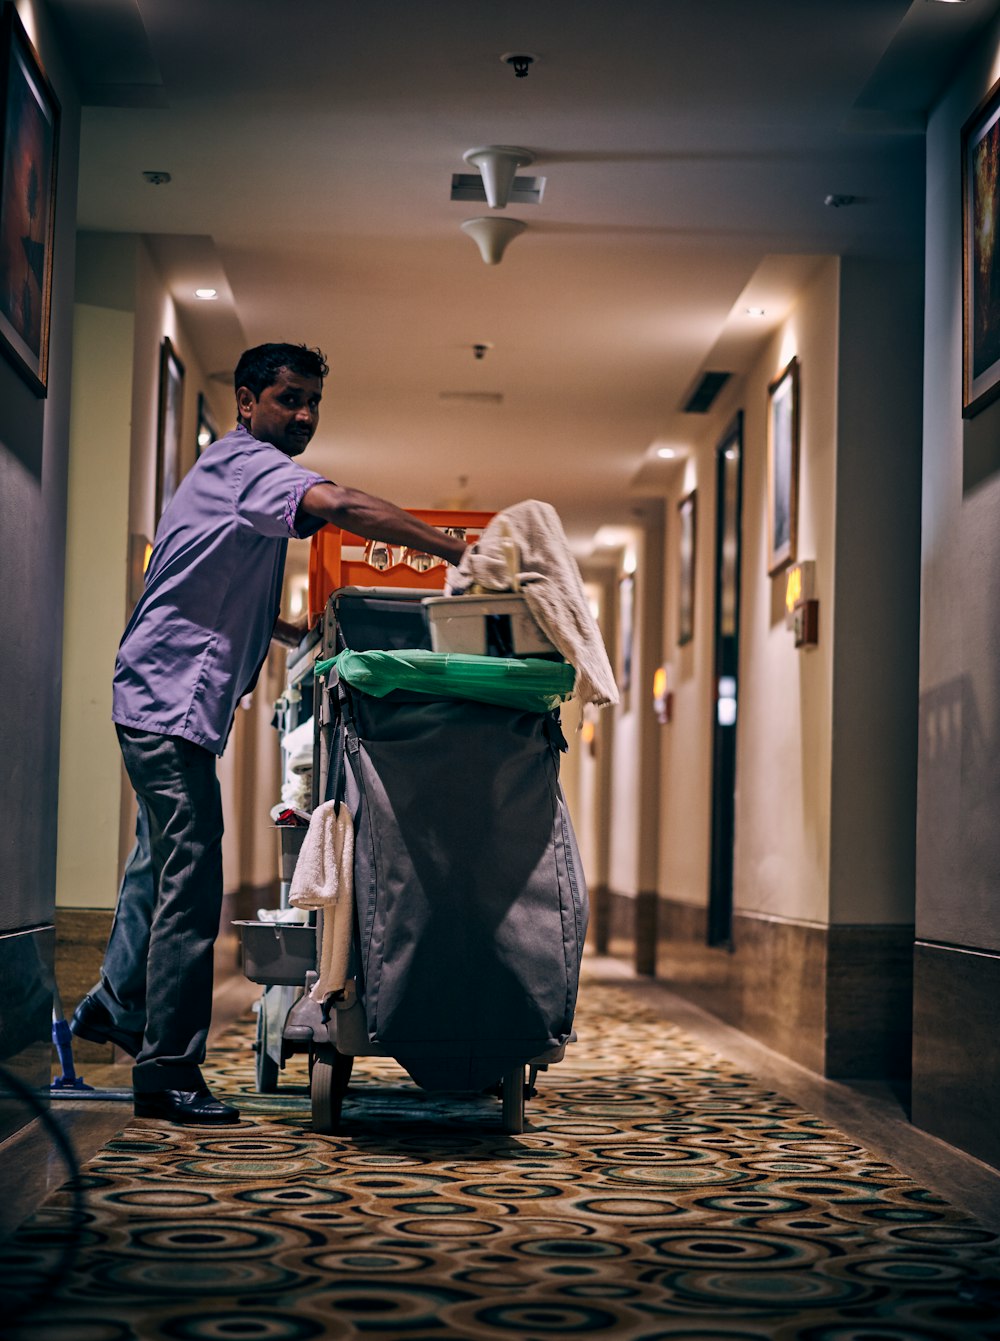 Room cleaning person in a hotel hallway with his equipments